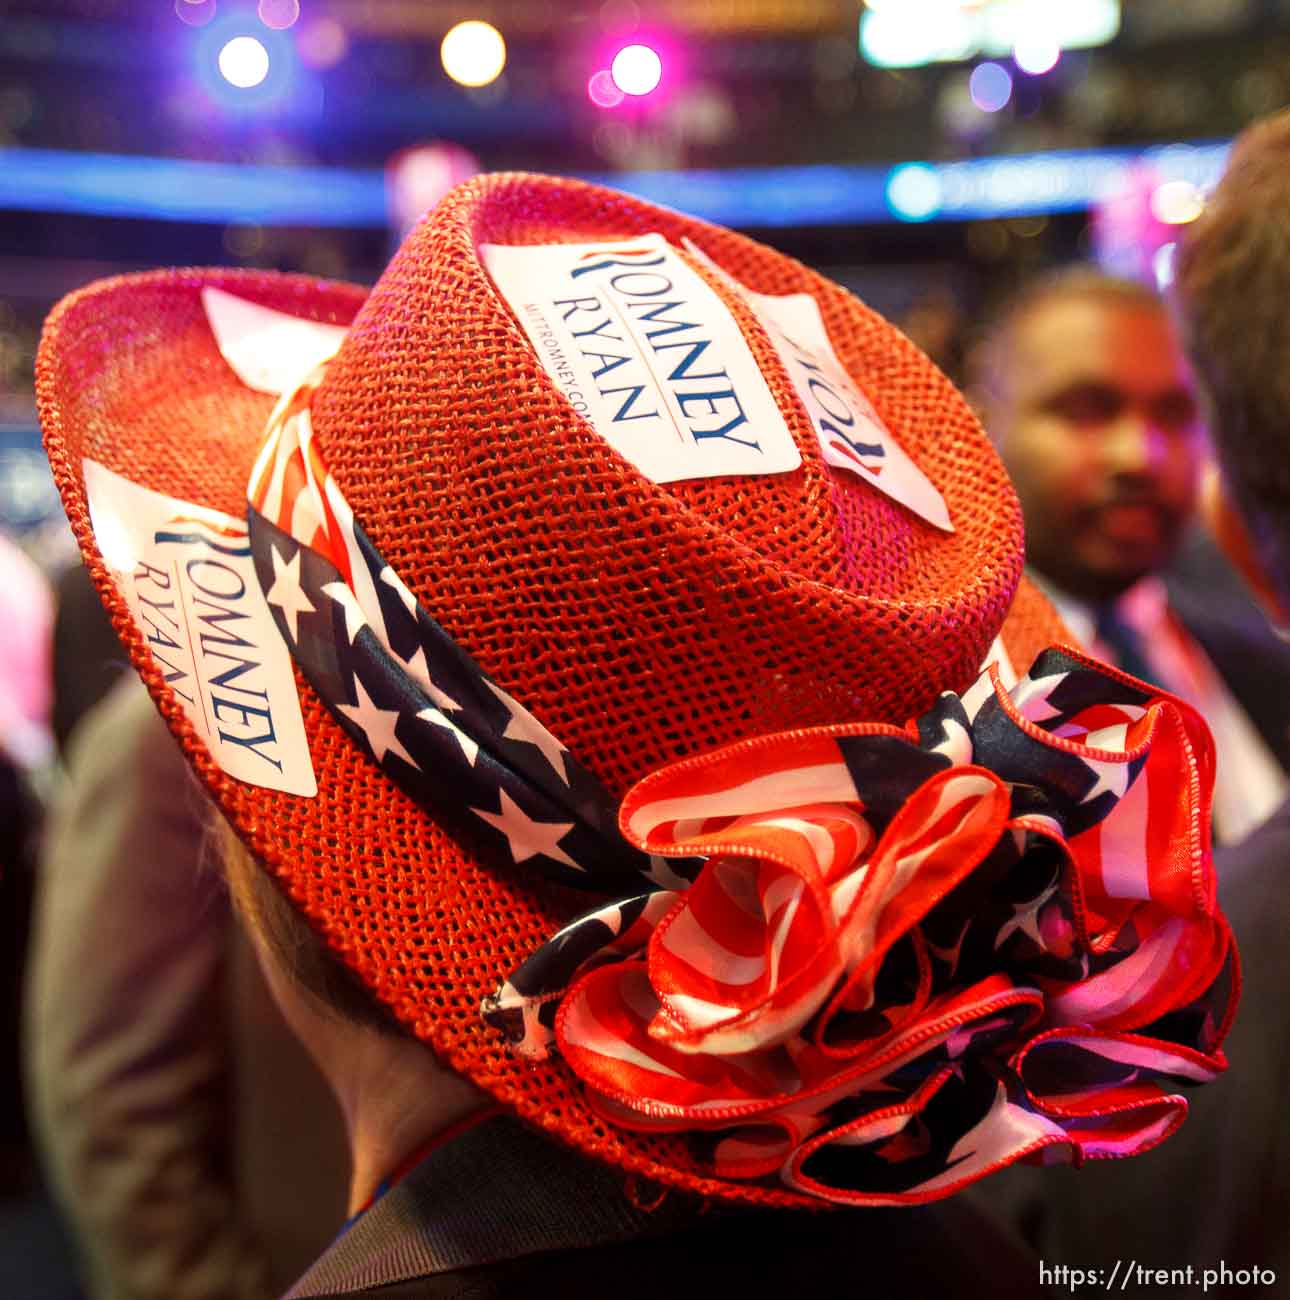 Republican National Convention – Faces